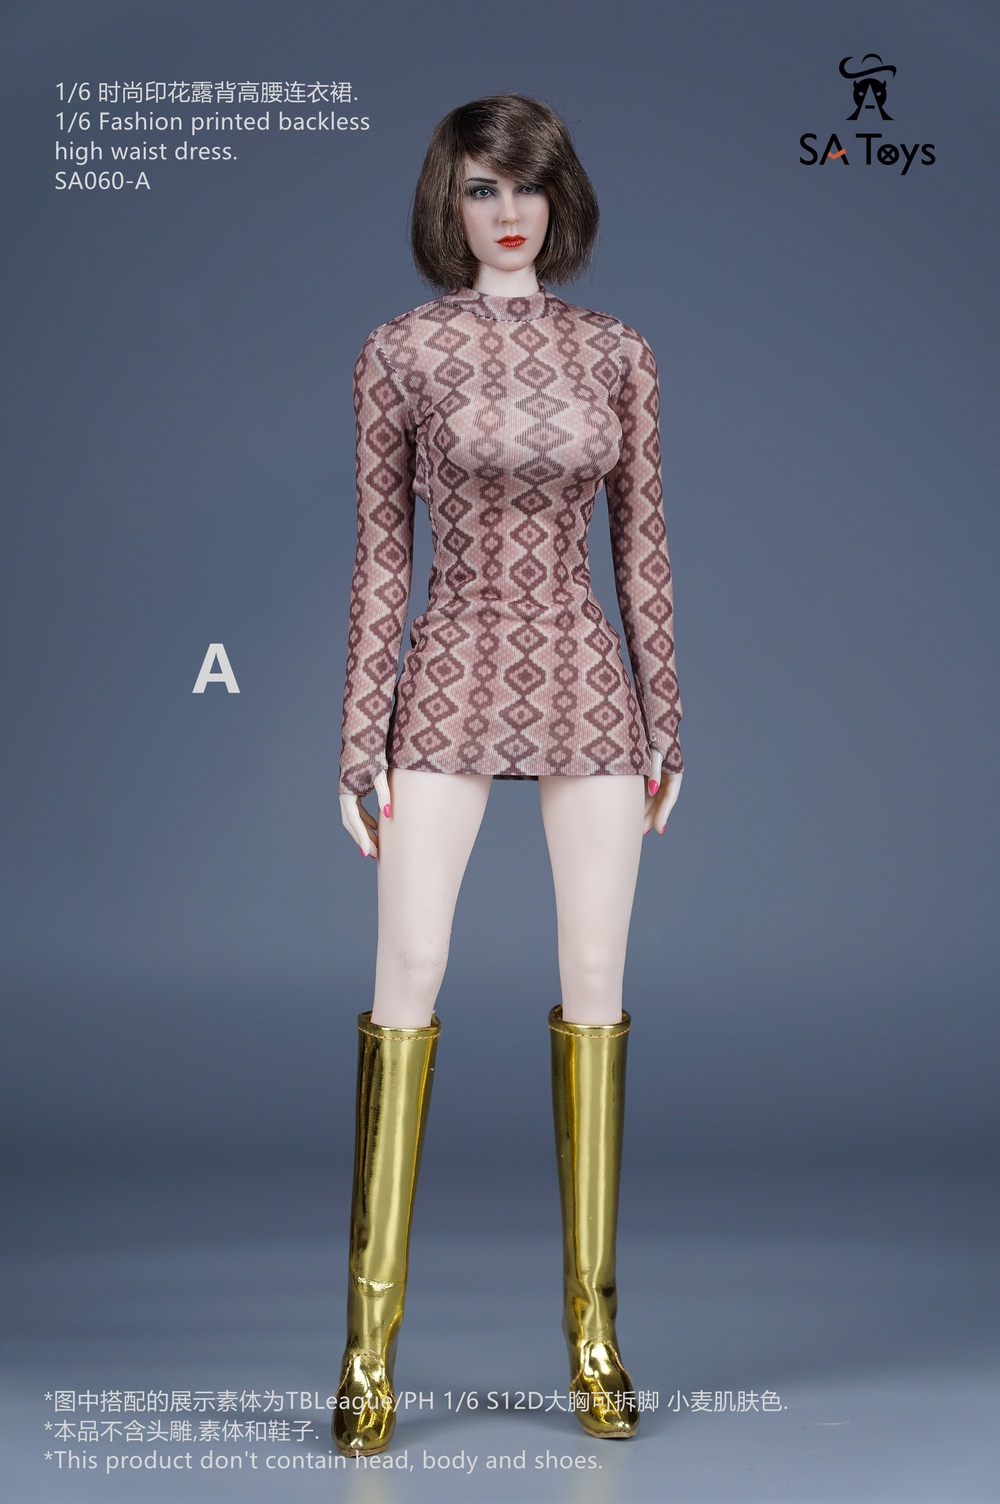 clothing - NEW PRODUCT: SA Toys: 1/6 Lantern Sleeve Leather Pants, Leopard Printed Leather Pants, Printed Backless Dresses (Multiple Options) 10594211